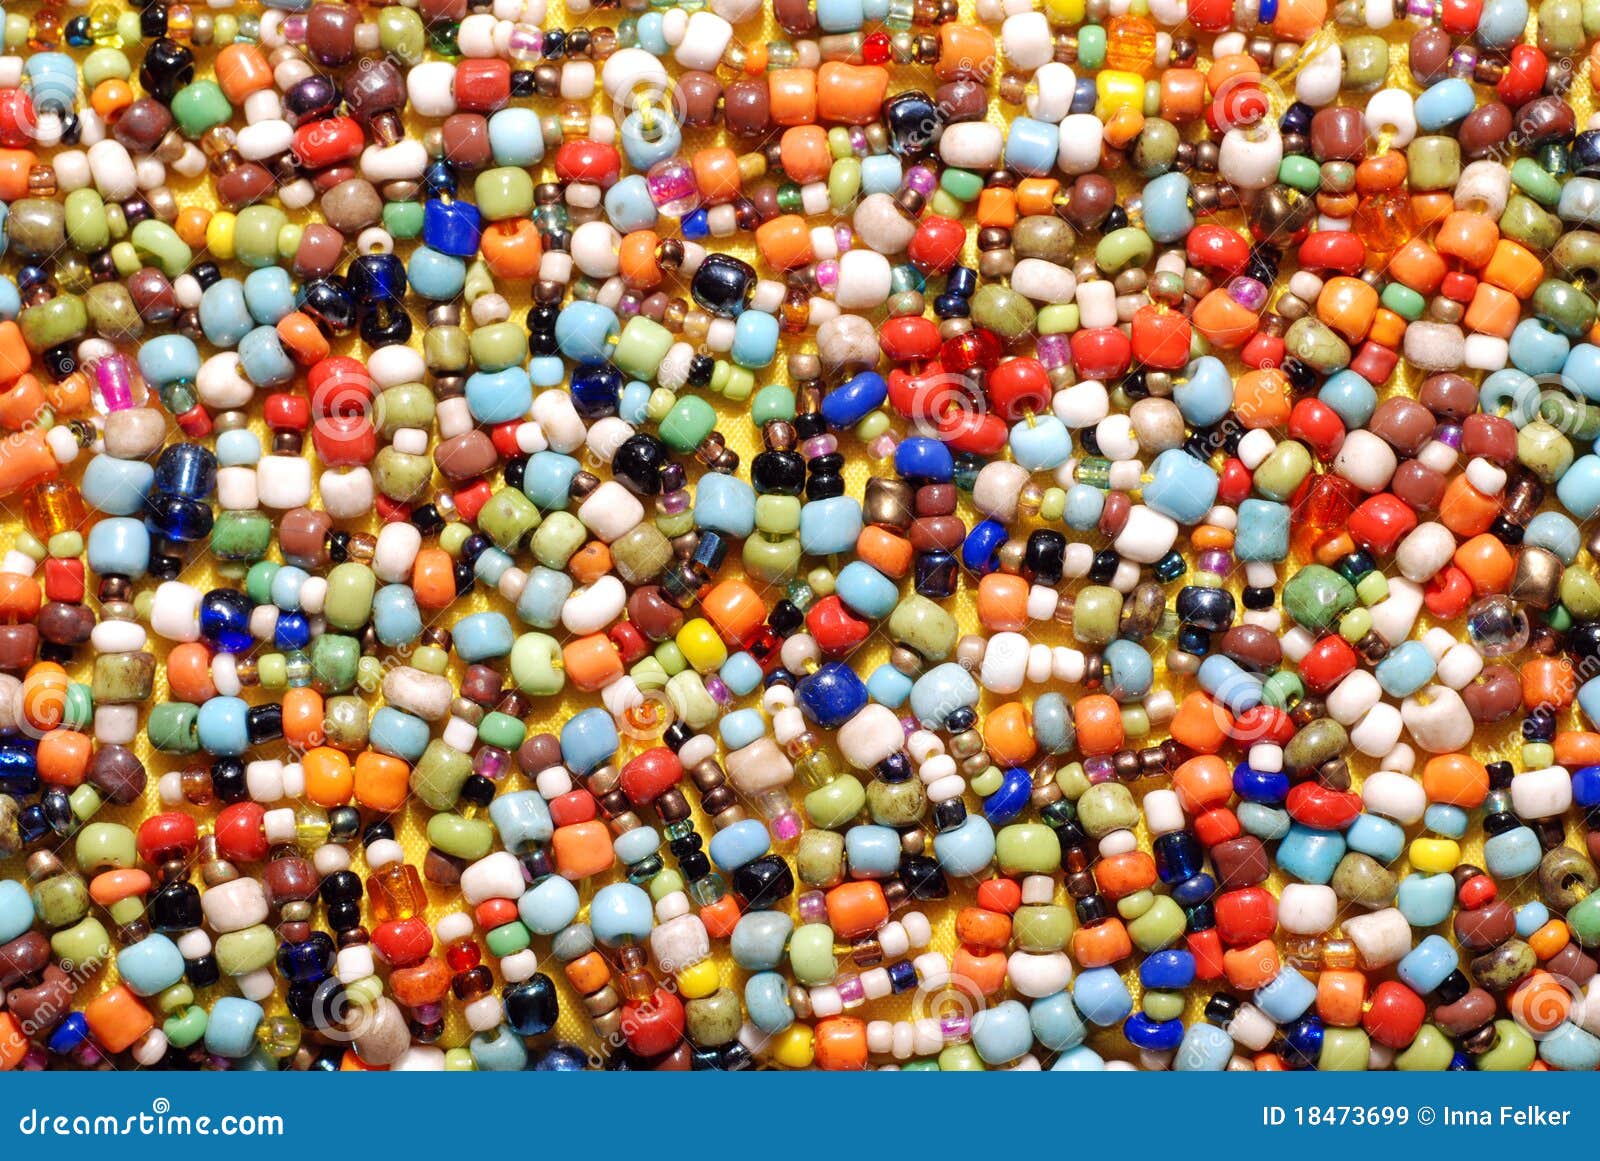 Colorful beads background stock image. Image of backgrounds - 18473699